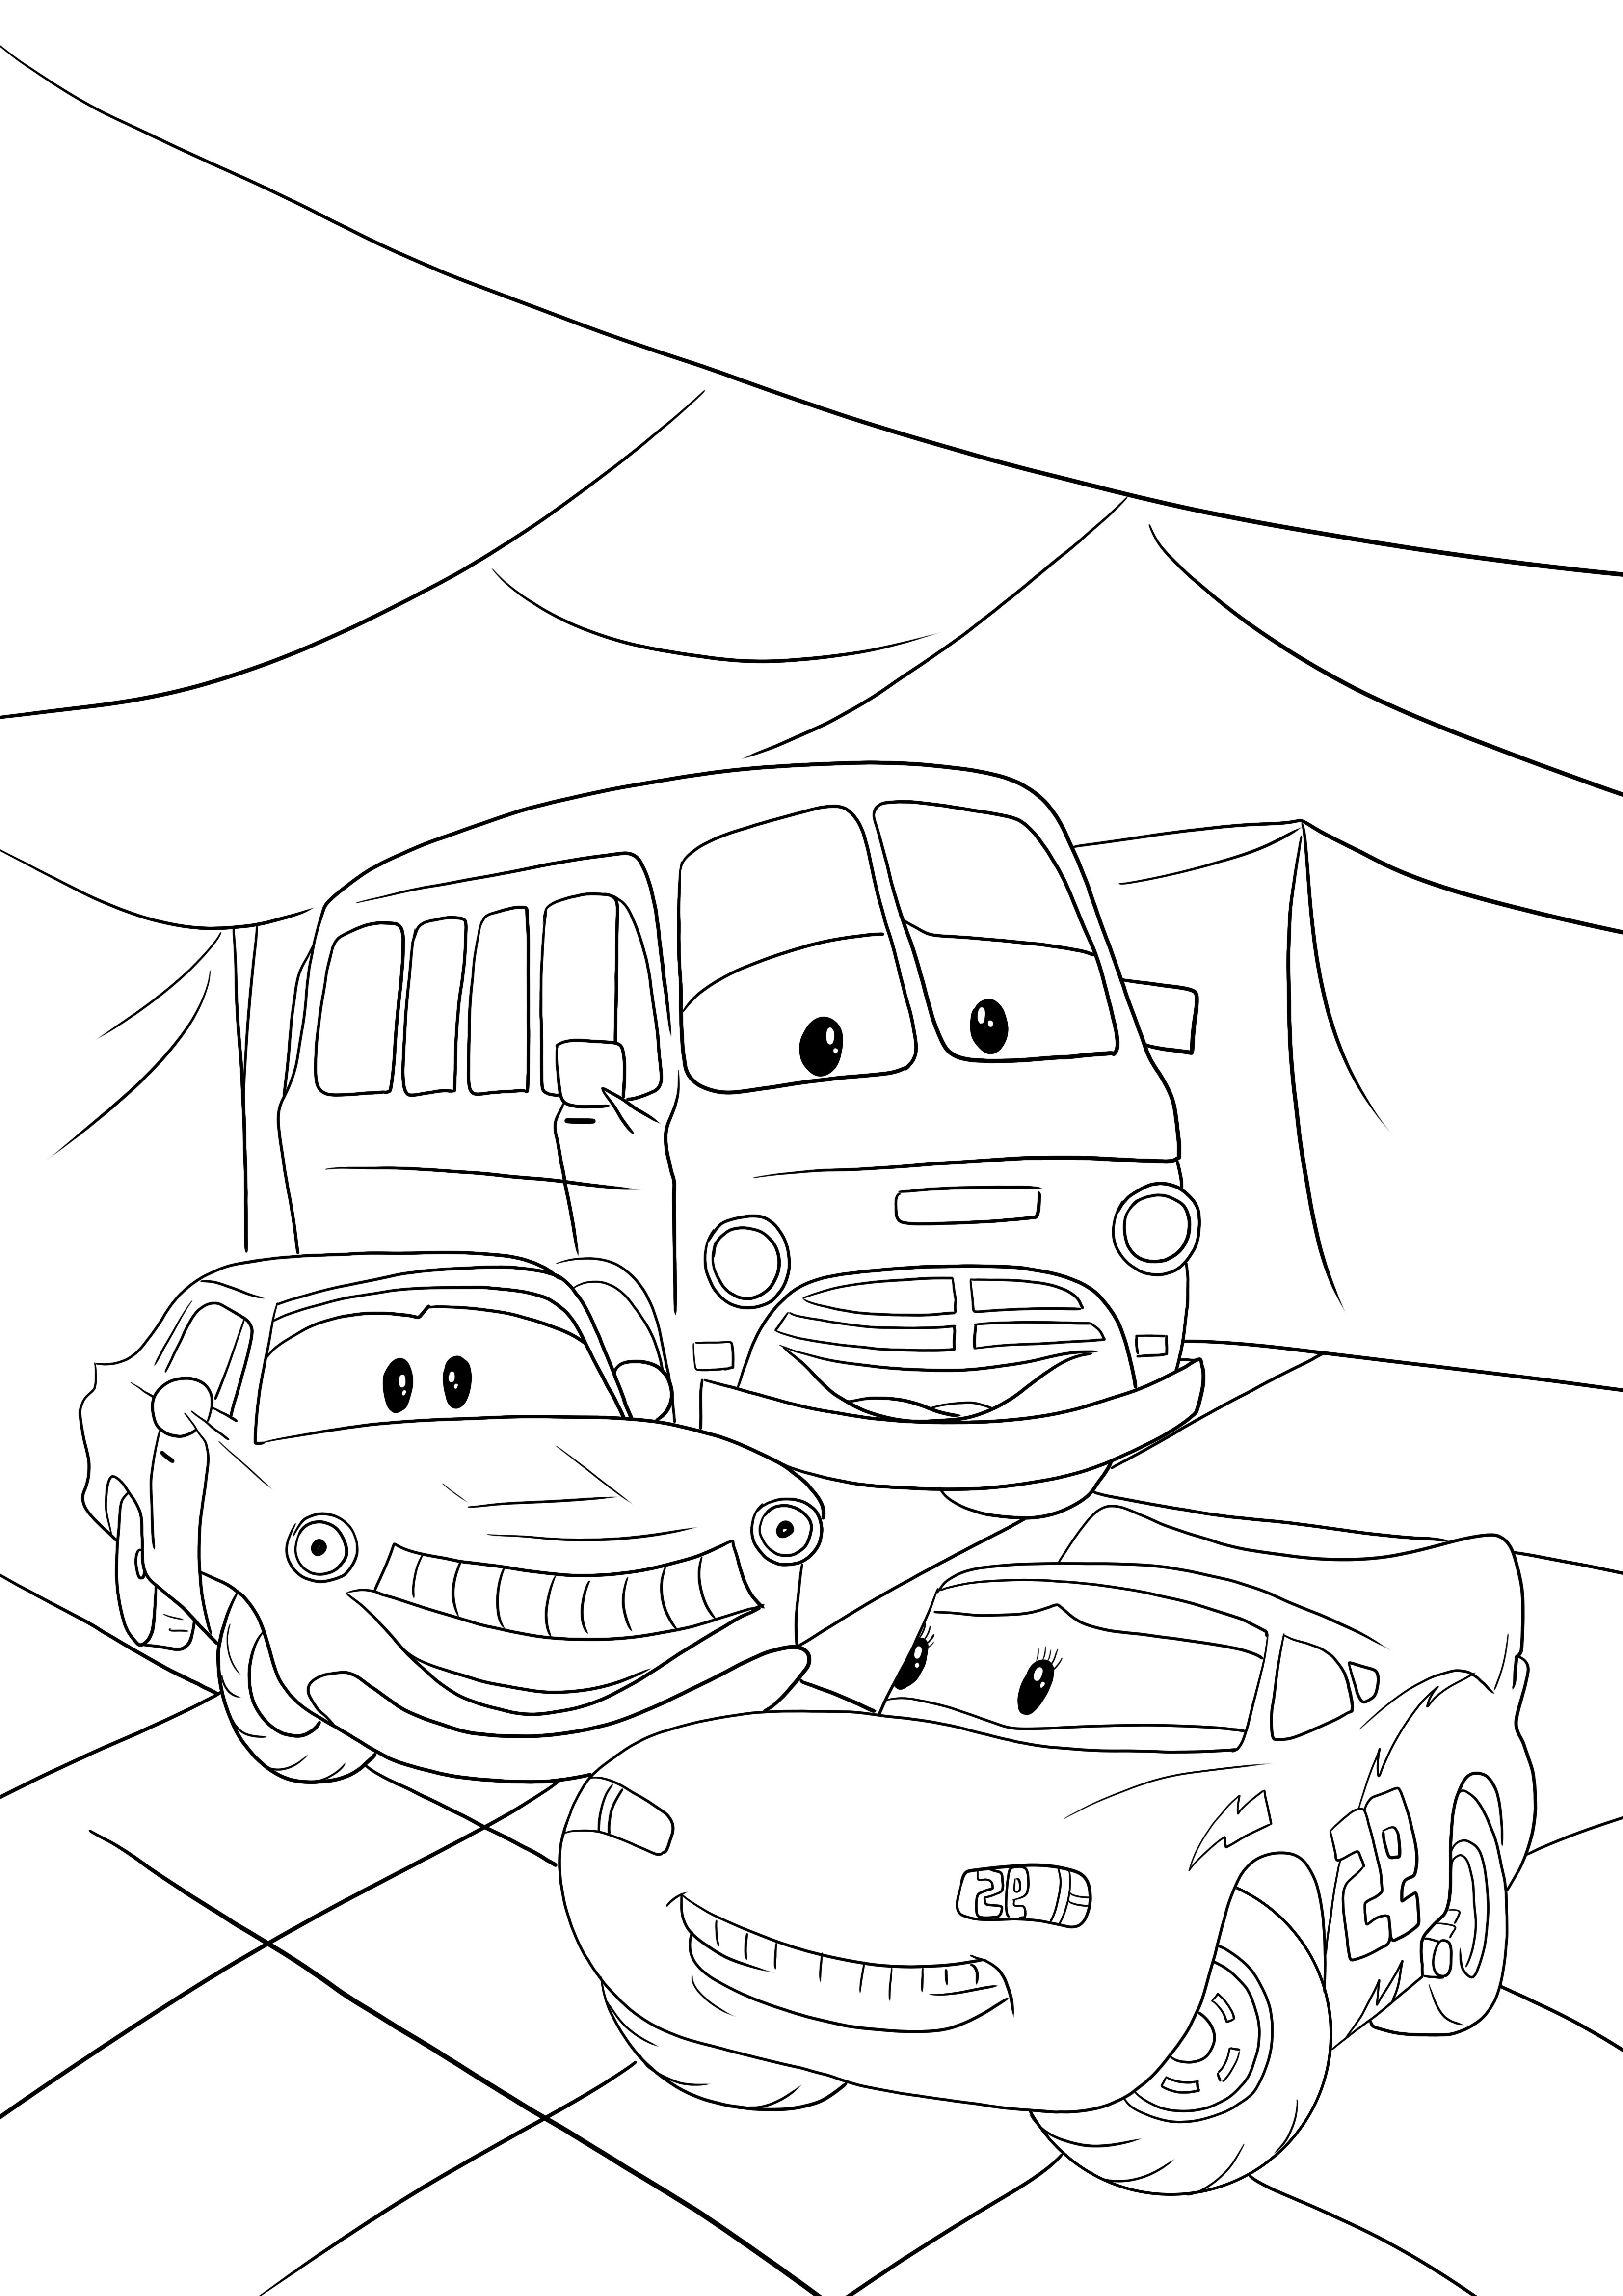 Lighting McQueen prepares for racing coloring and printing free